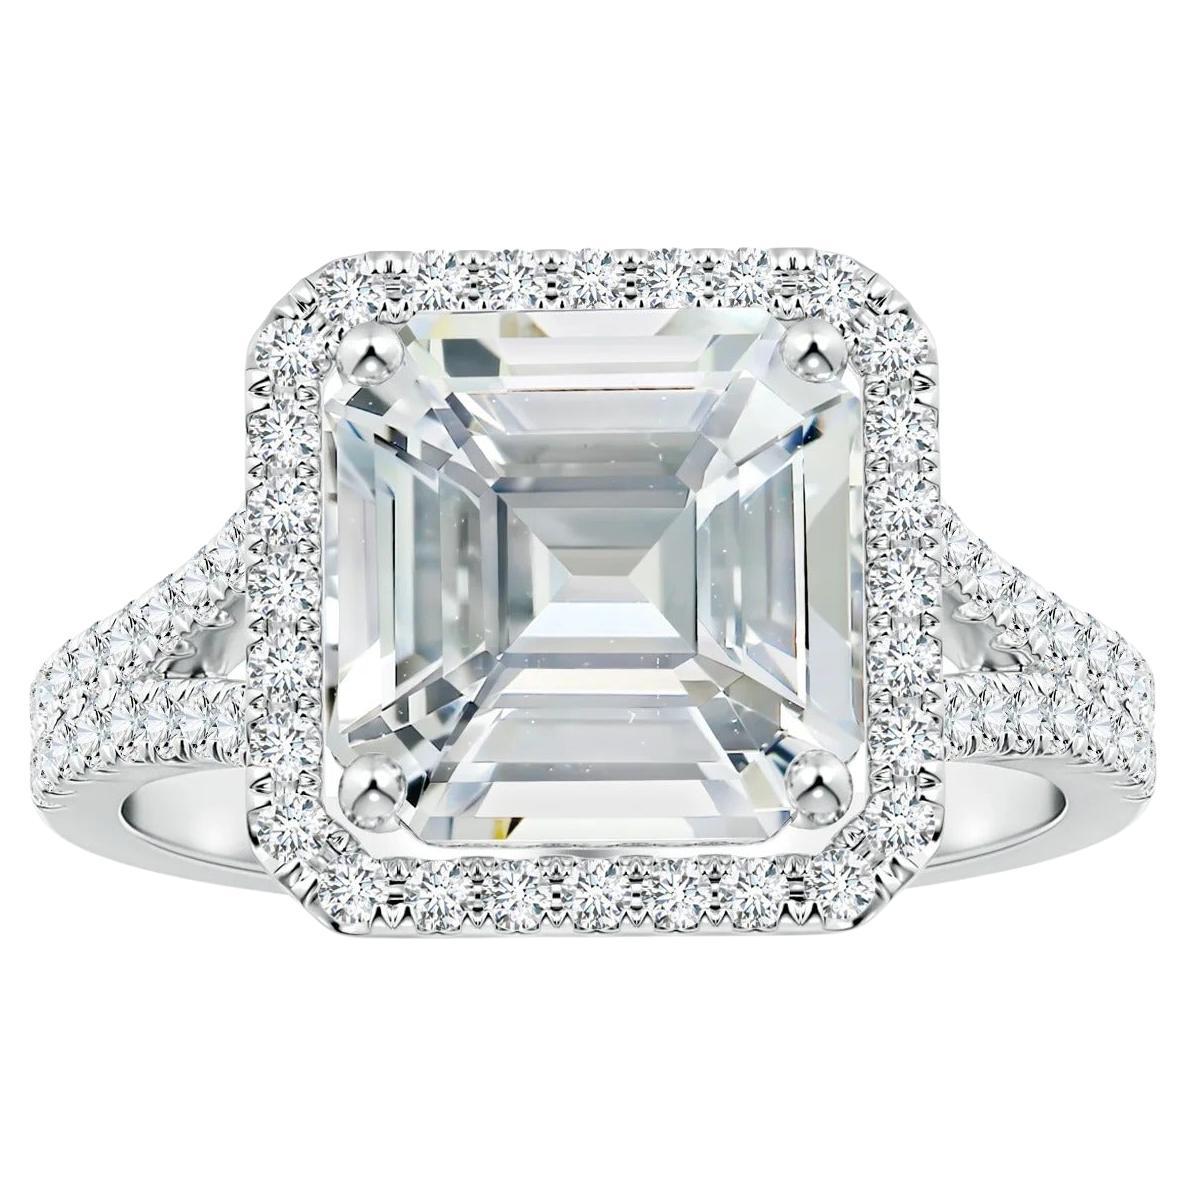 For Sale:  Angara GIA Certified Natural Emerald-Cut White Sapphire Ring in White Gold